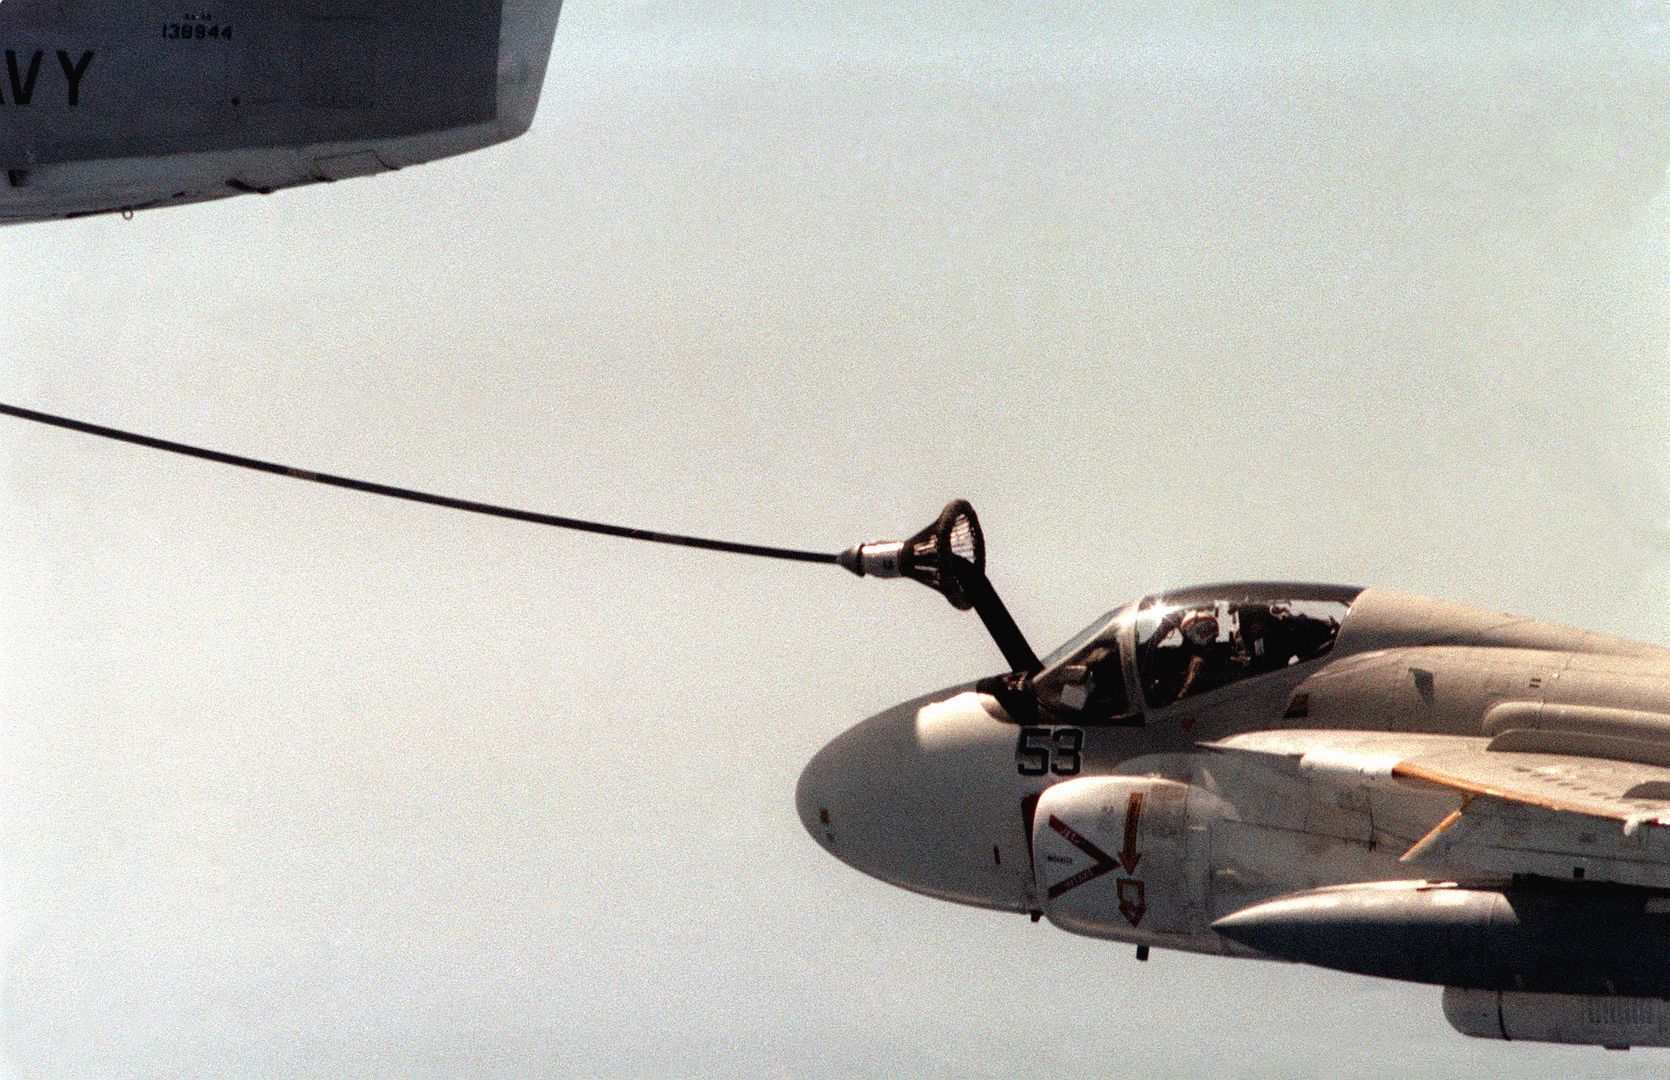 A 6 Intruder Aircraft Is Refueled During Its Flight To Follow A Tomahawk Submarine Launched Cruise Missile To Its Target On The Tonapah Test Range In Nevada